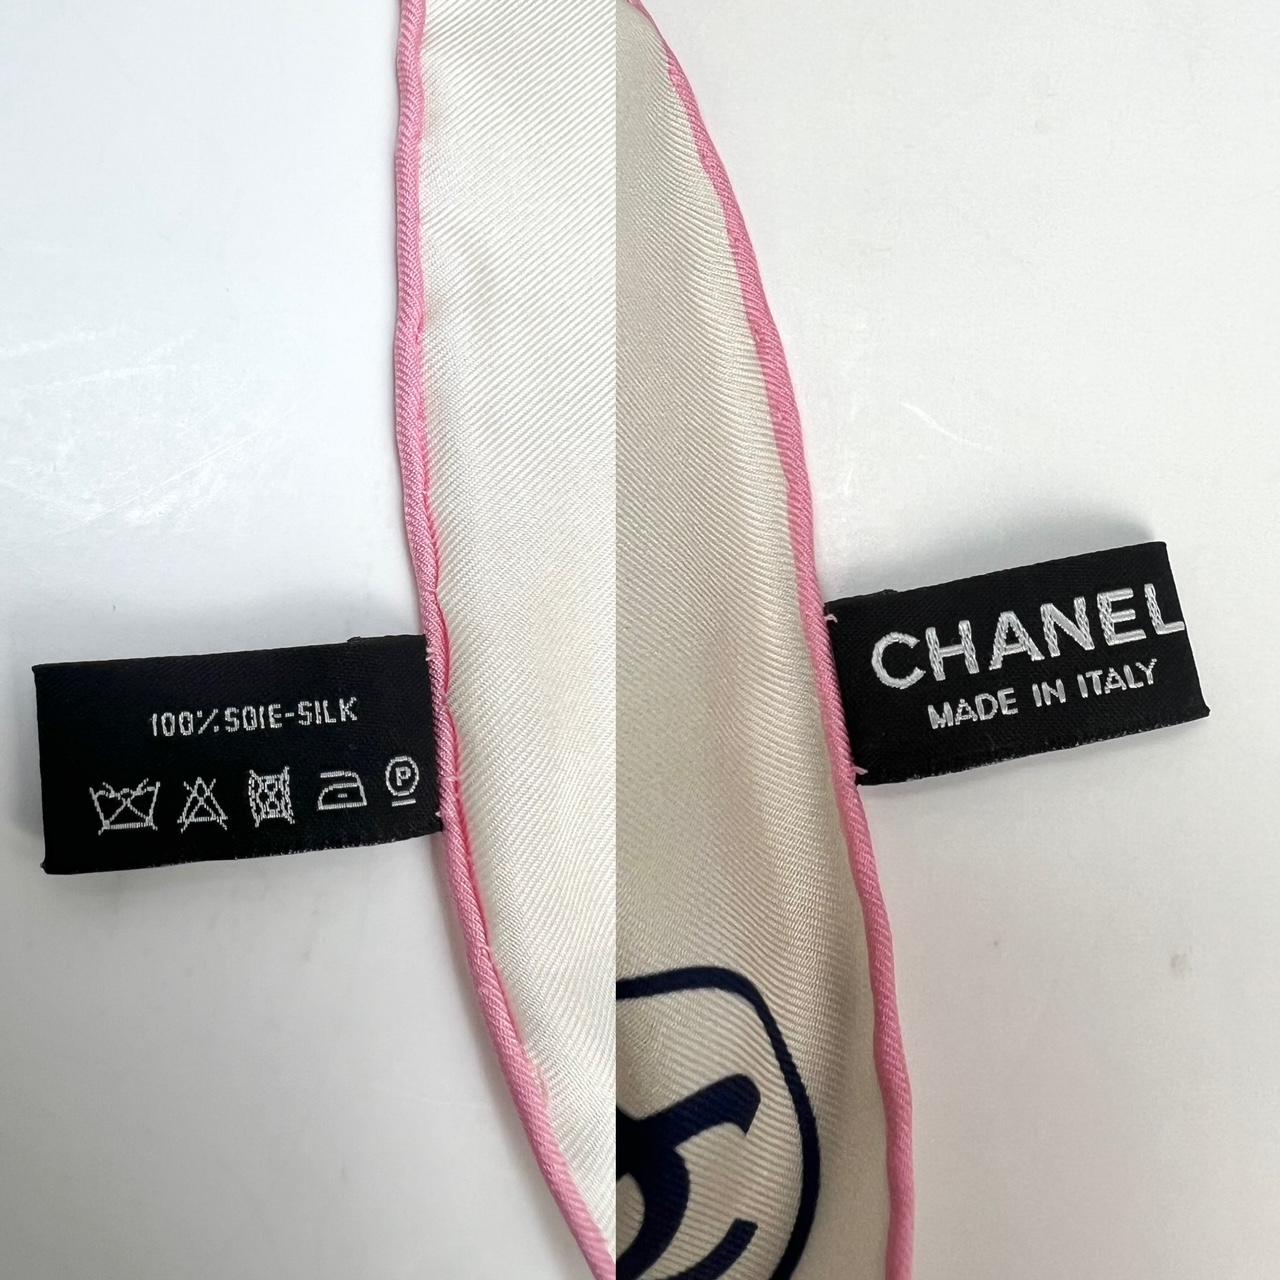 Pre-Owned  100% Authentic
Chanel Silk Pink Black Blue Scarf 
RATING: B...Very Good, well maintained, 
shows minor signs of wear
MATERIAL: 100% silk
MADE IN: Italy 
MEASUREMENTS: H 36 '' x L 36''  
INCLUDED: *Chanel box W/tissue paper
Please see all